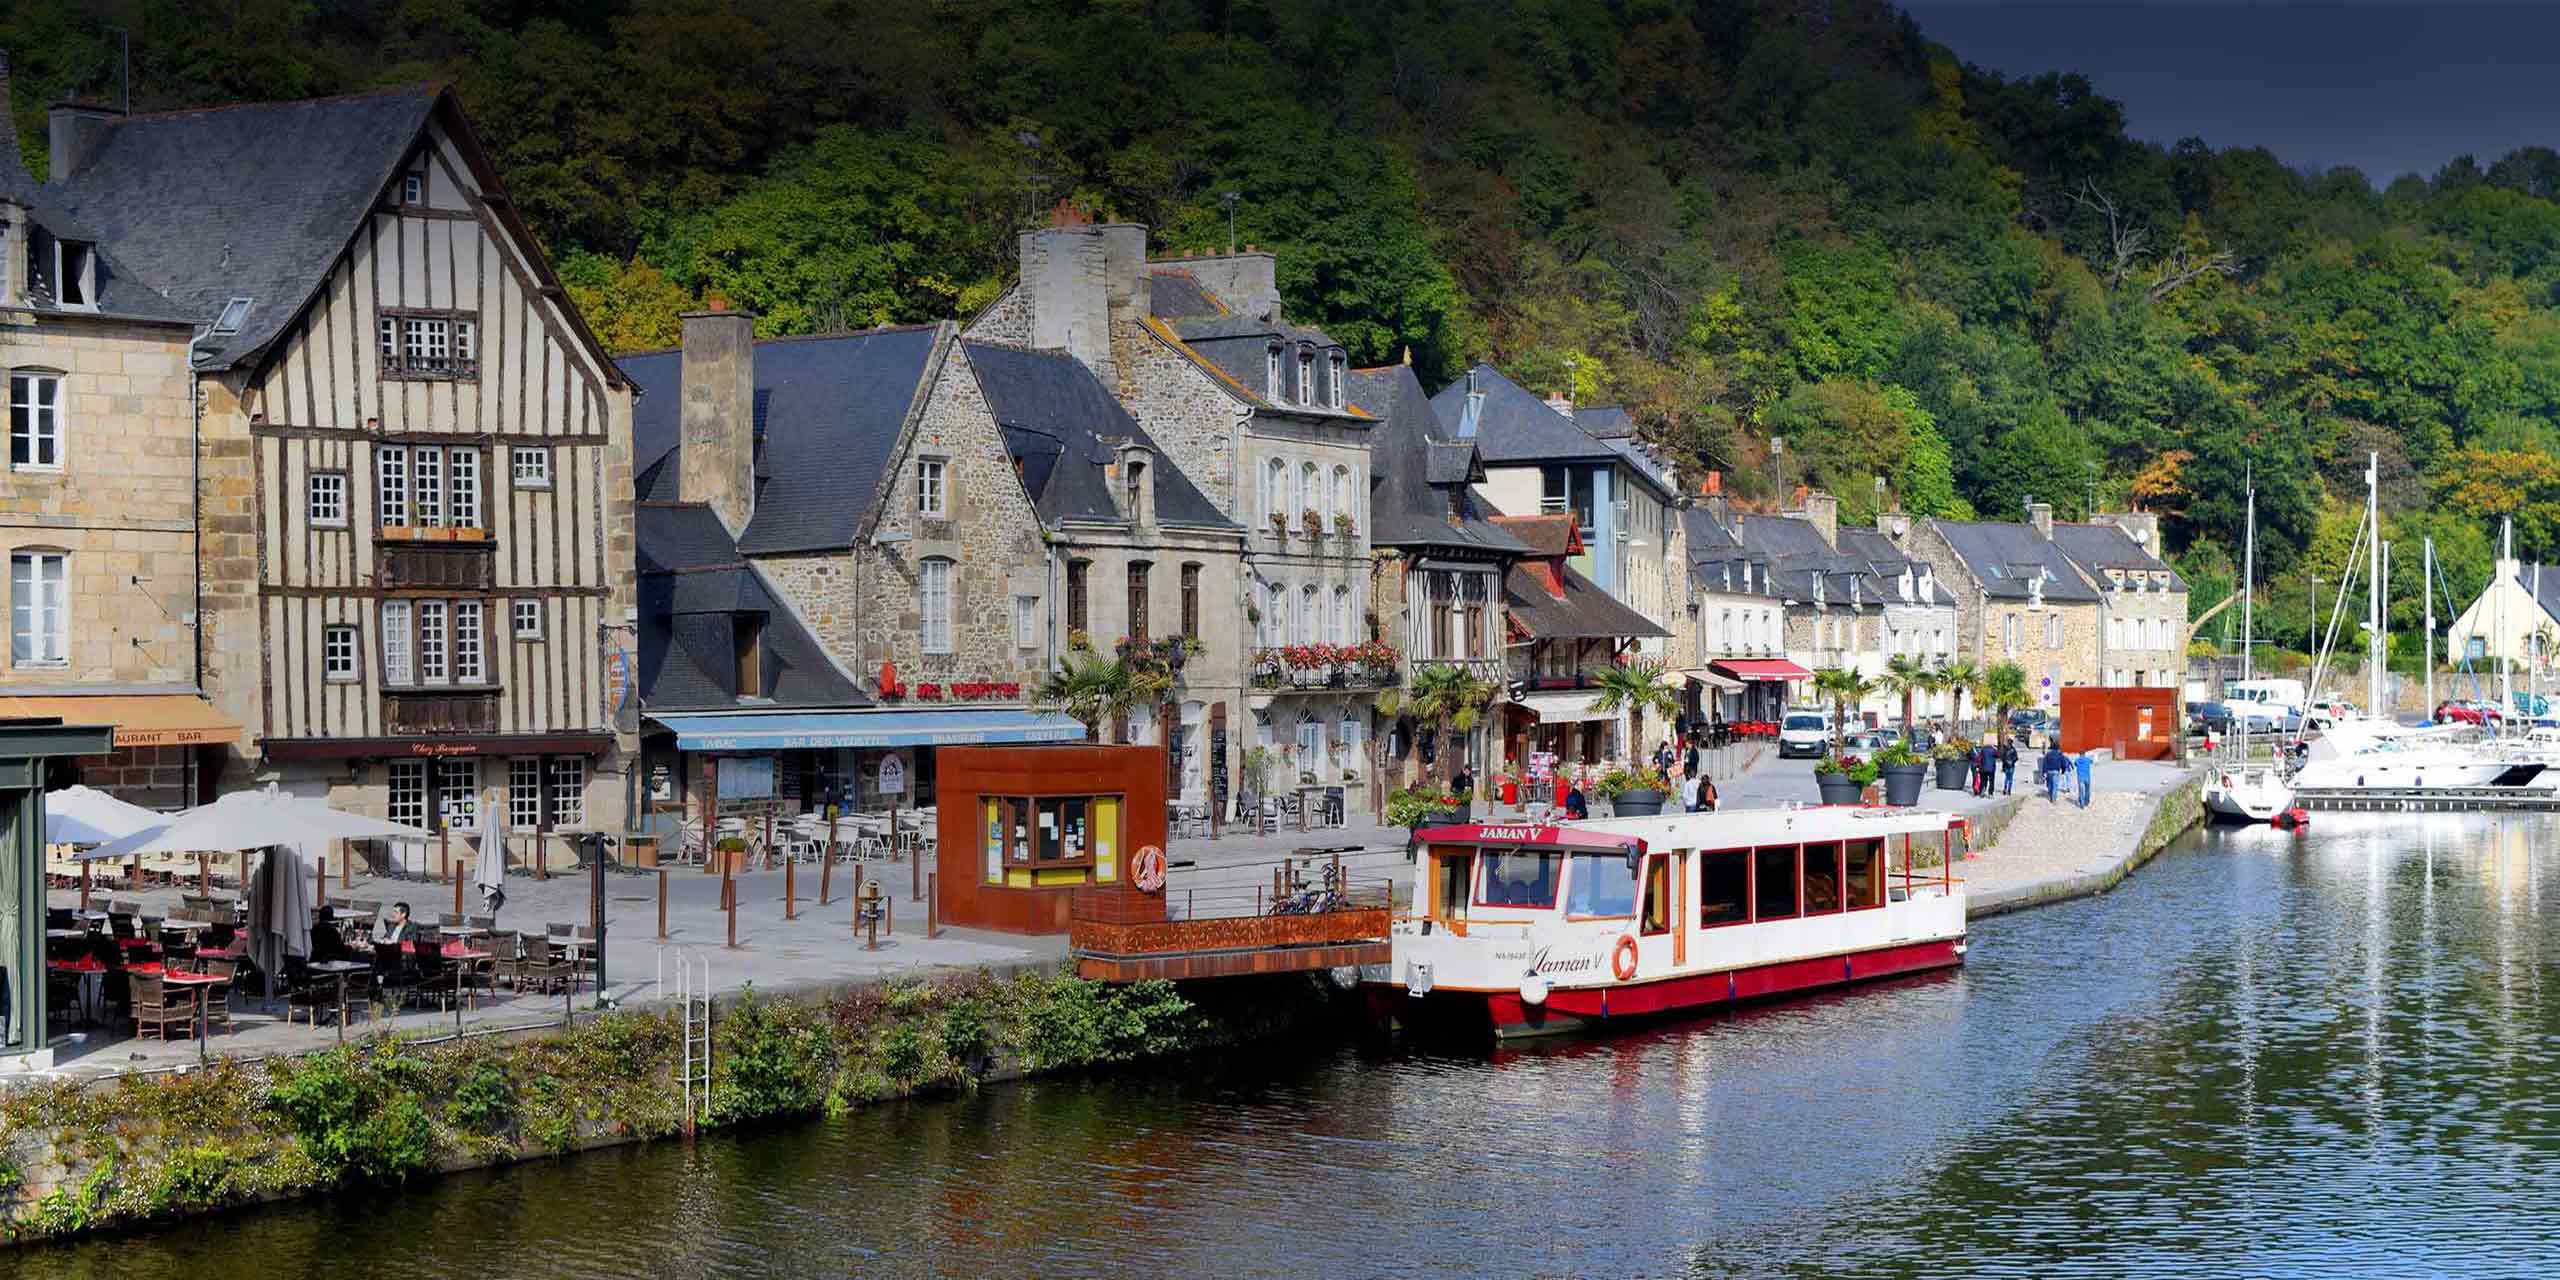 Dinan Self Catering Apartments and Holiday Cottage in Brittany